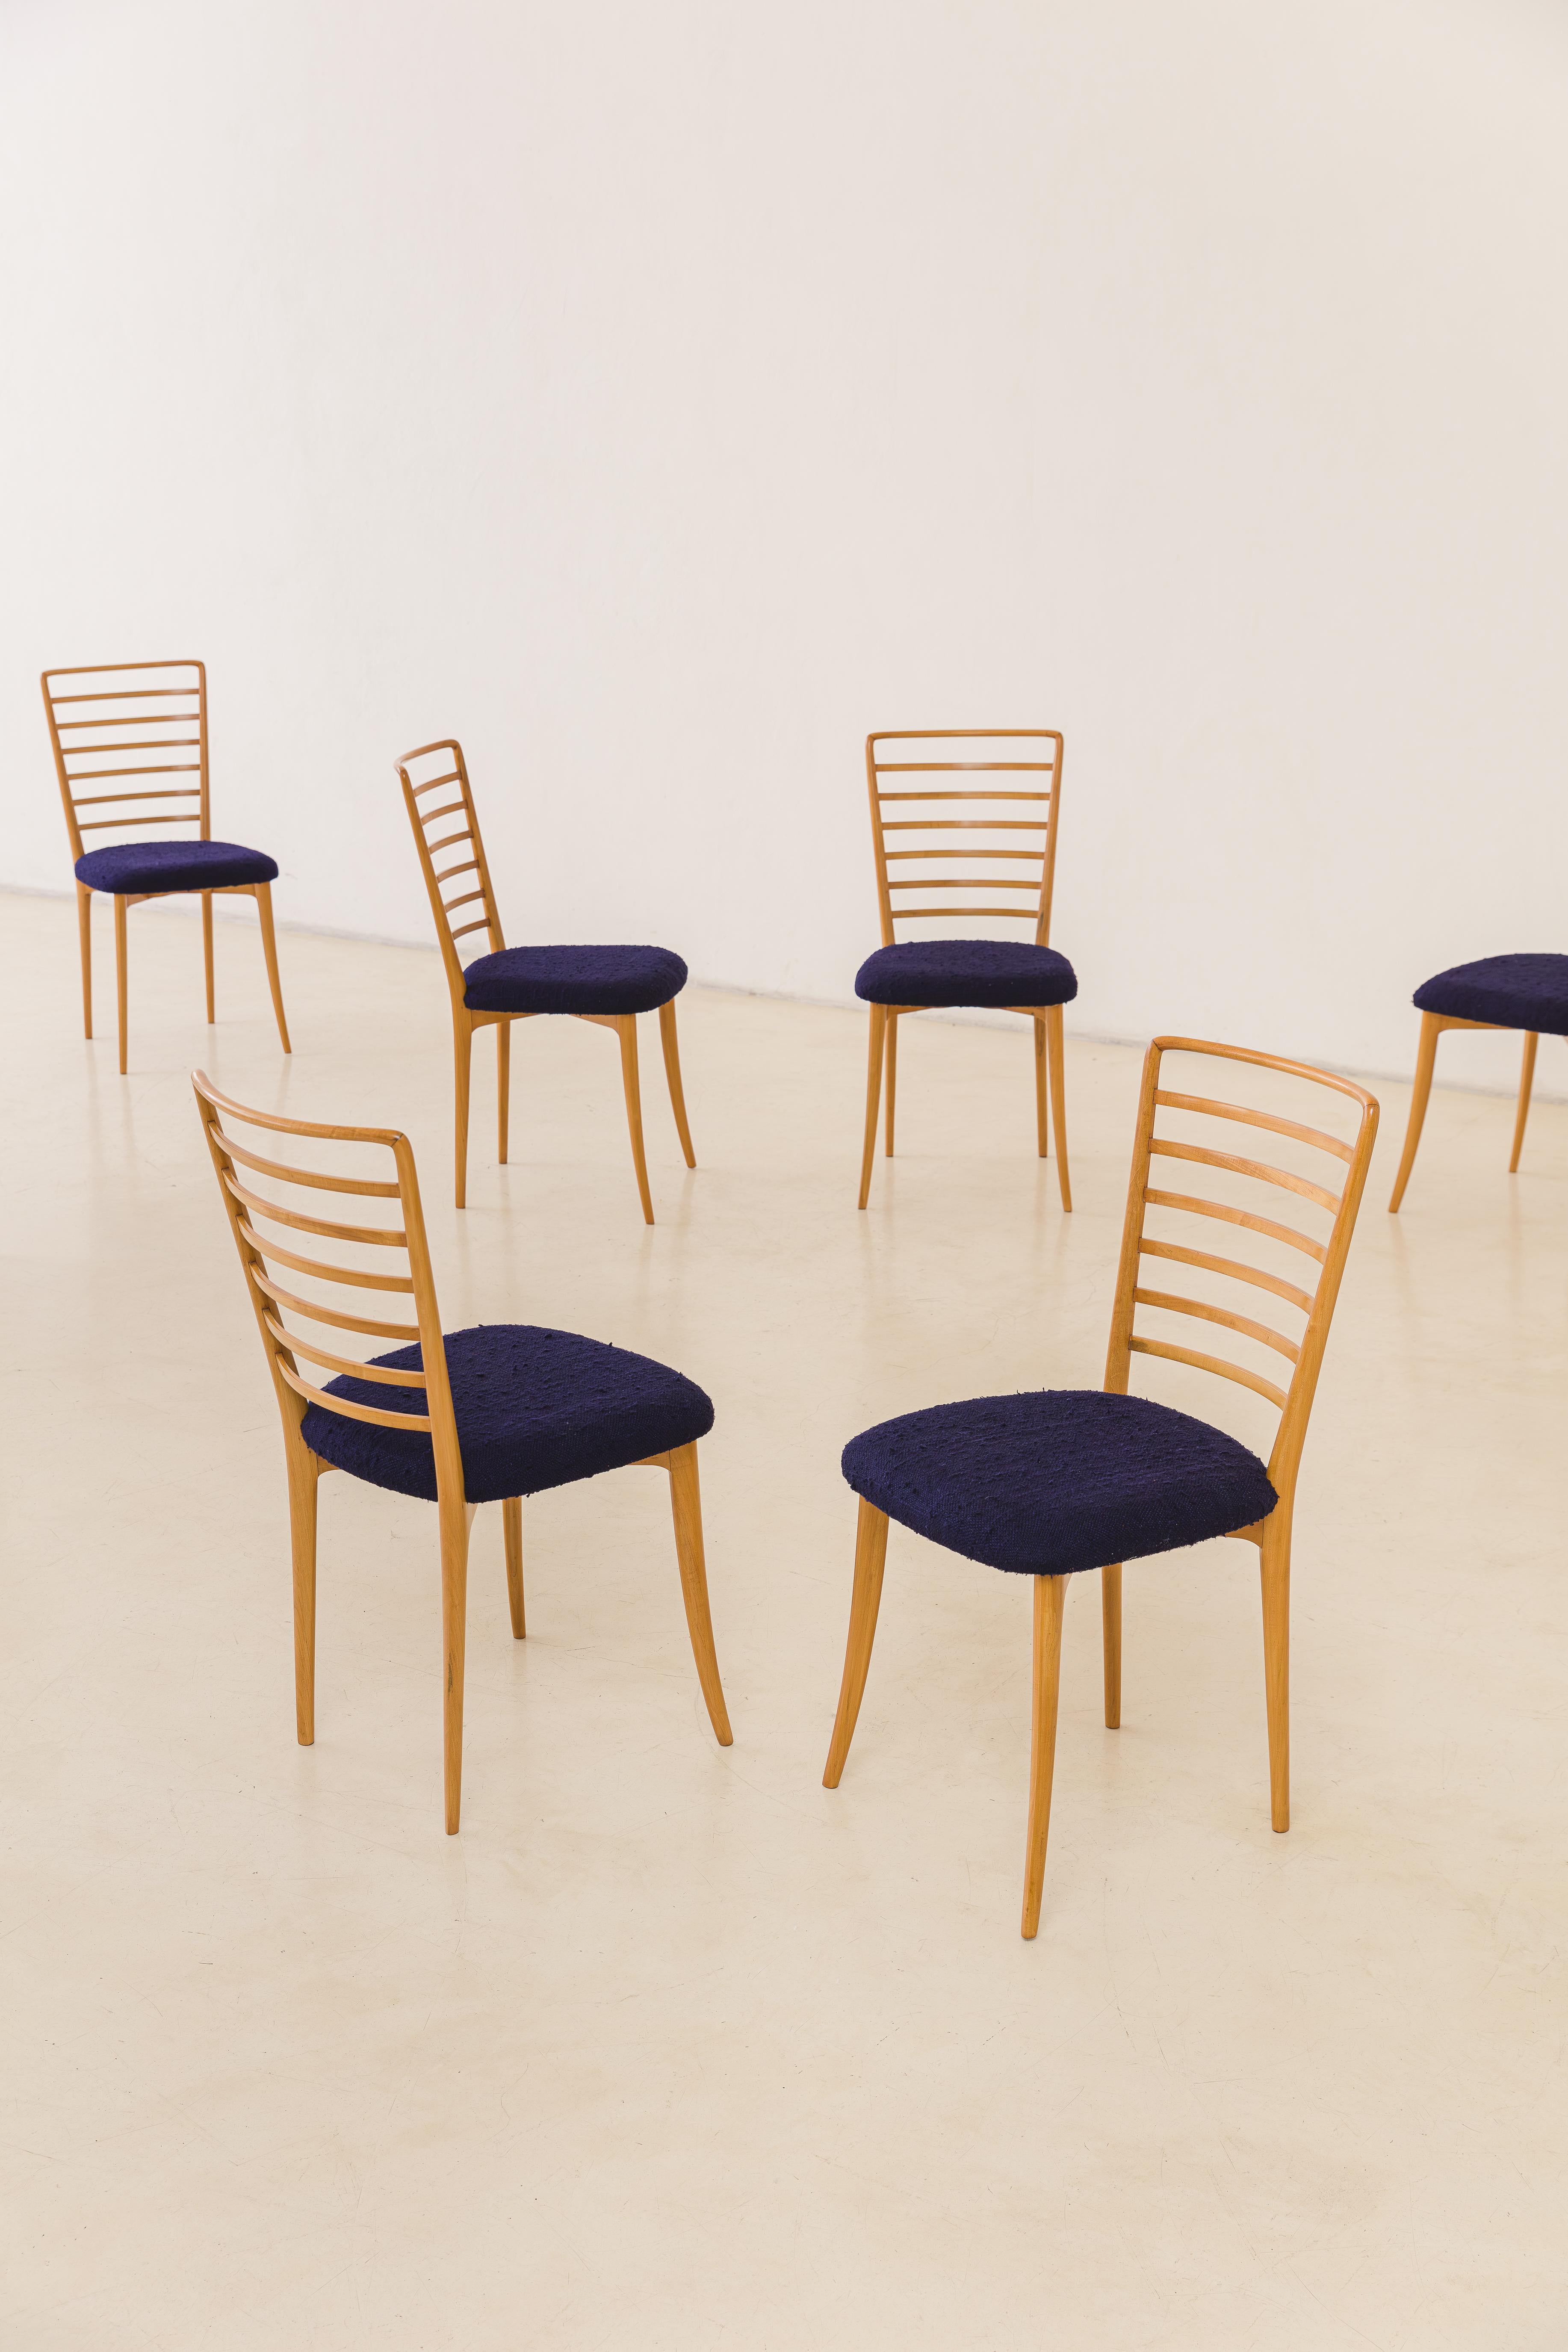 Available in eight units, this set of dining chairs was designed by Joaquim Tenreiro (1906-1992) in the 1950s. Much like Tenreiro's other creations, this sense of lightness transcends the weight and extends to surround grace and spatial